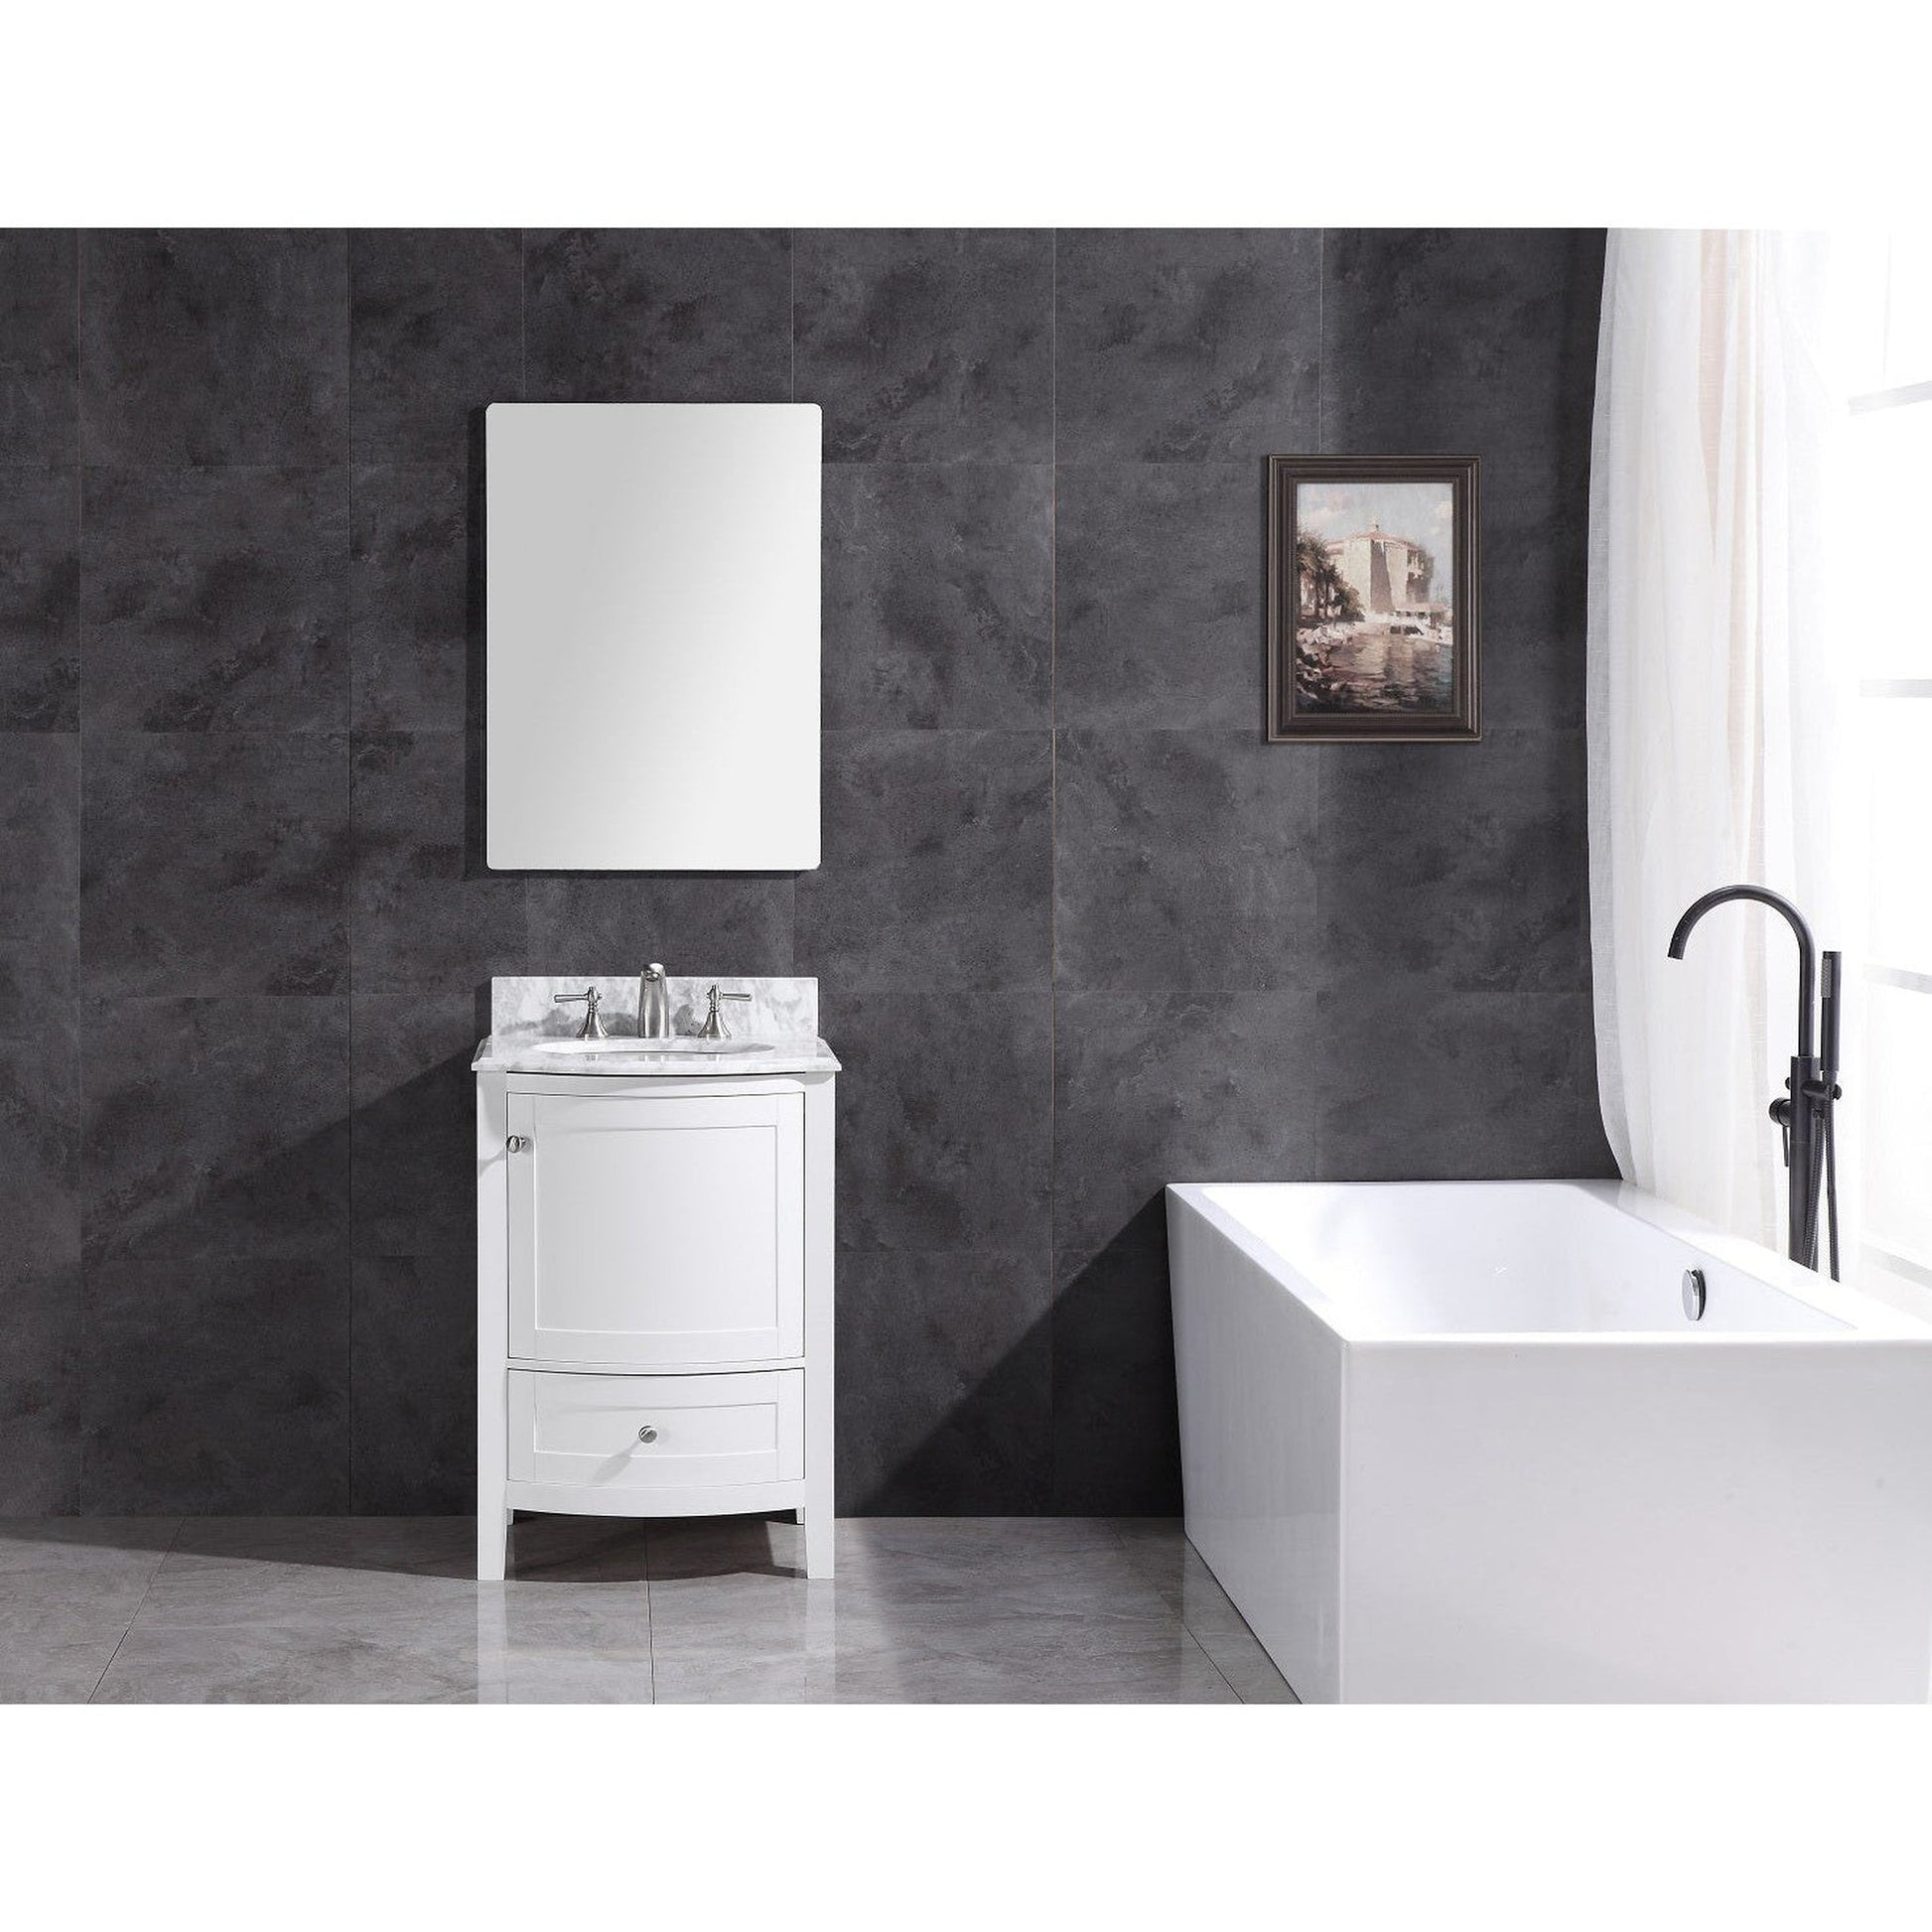 Legion Furniture WT9309 24" White Freestanding PVC Vanity Cabinet With Marble Top and White Ceramic Sink